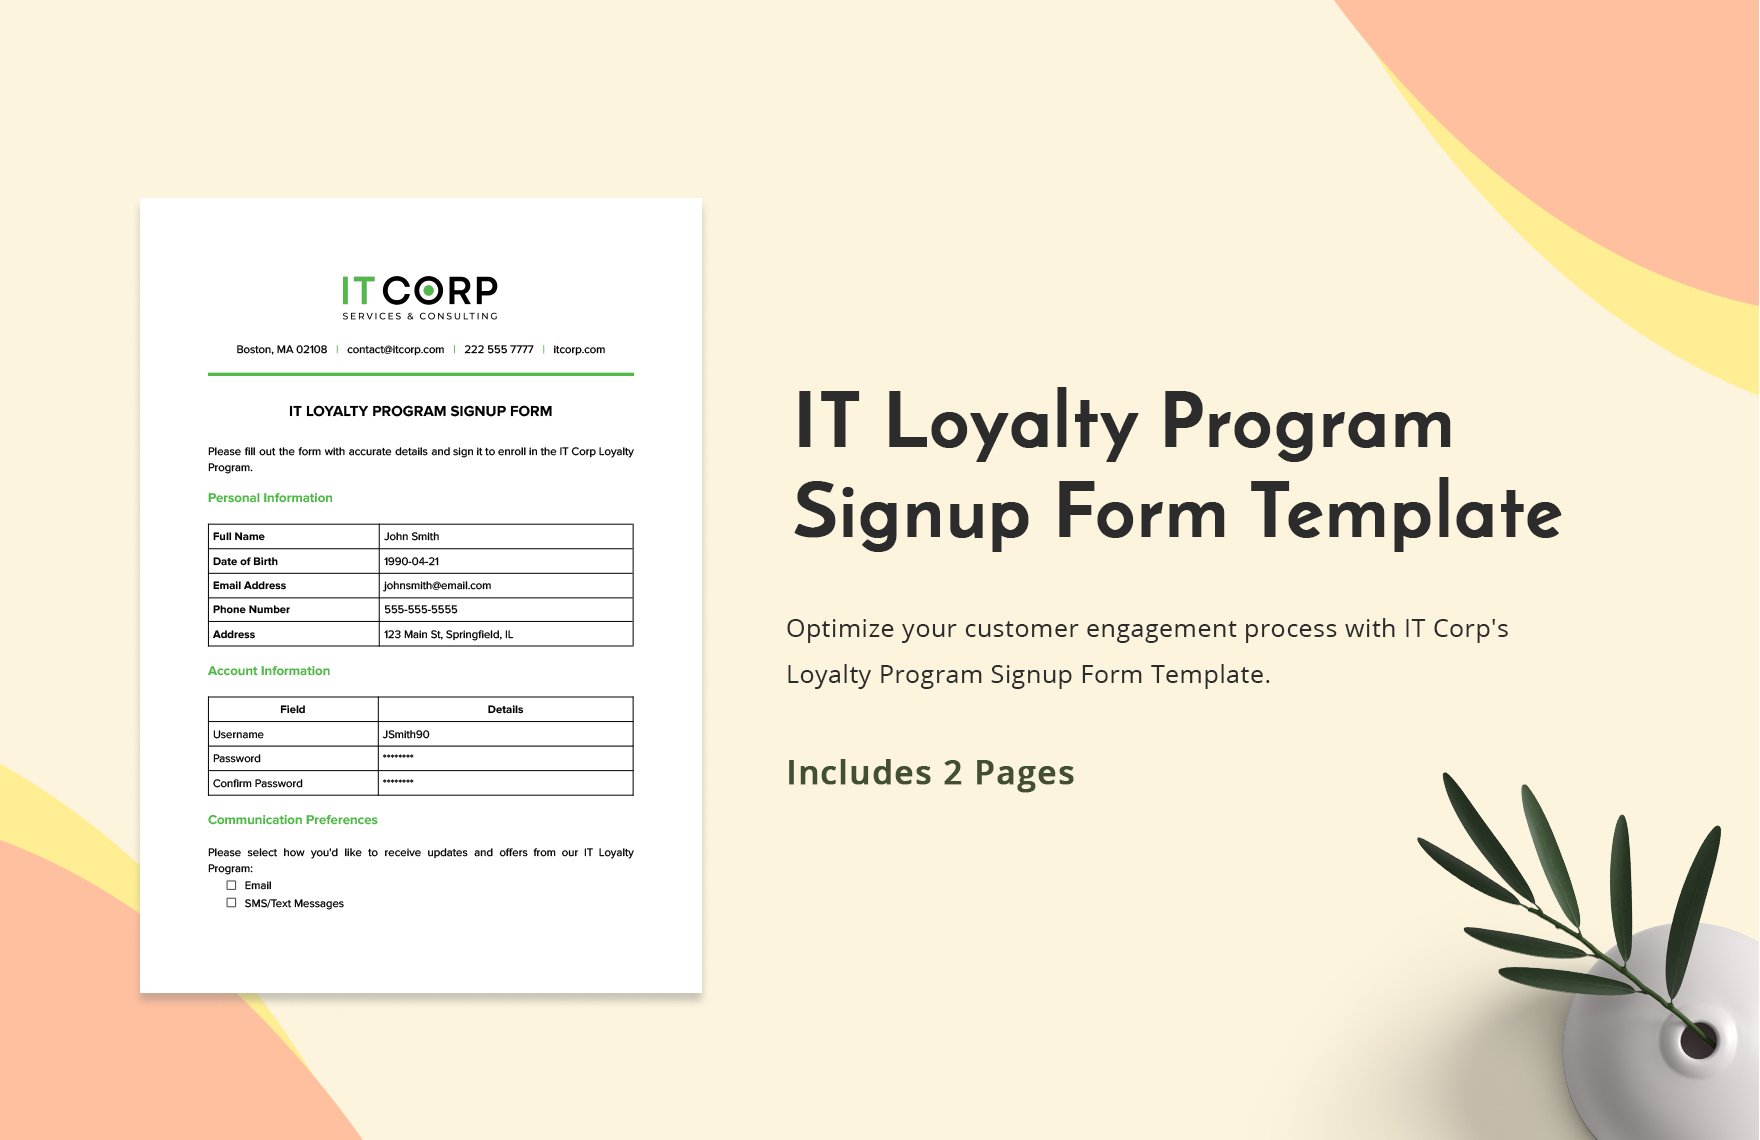 IT Loyalty Program Signup Form Template